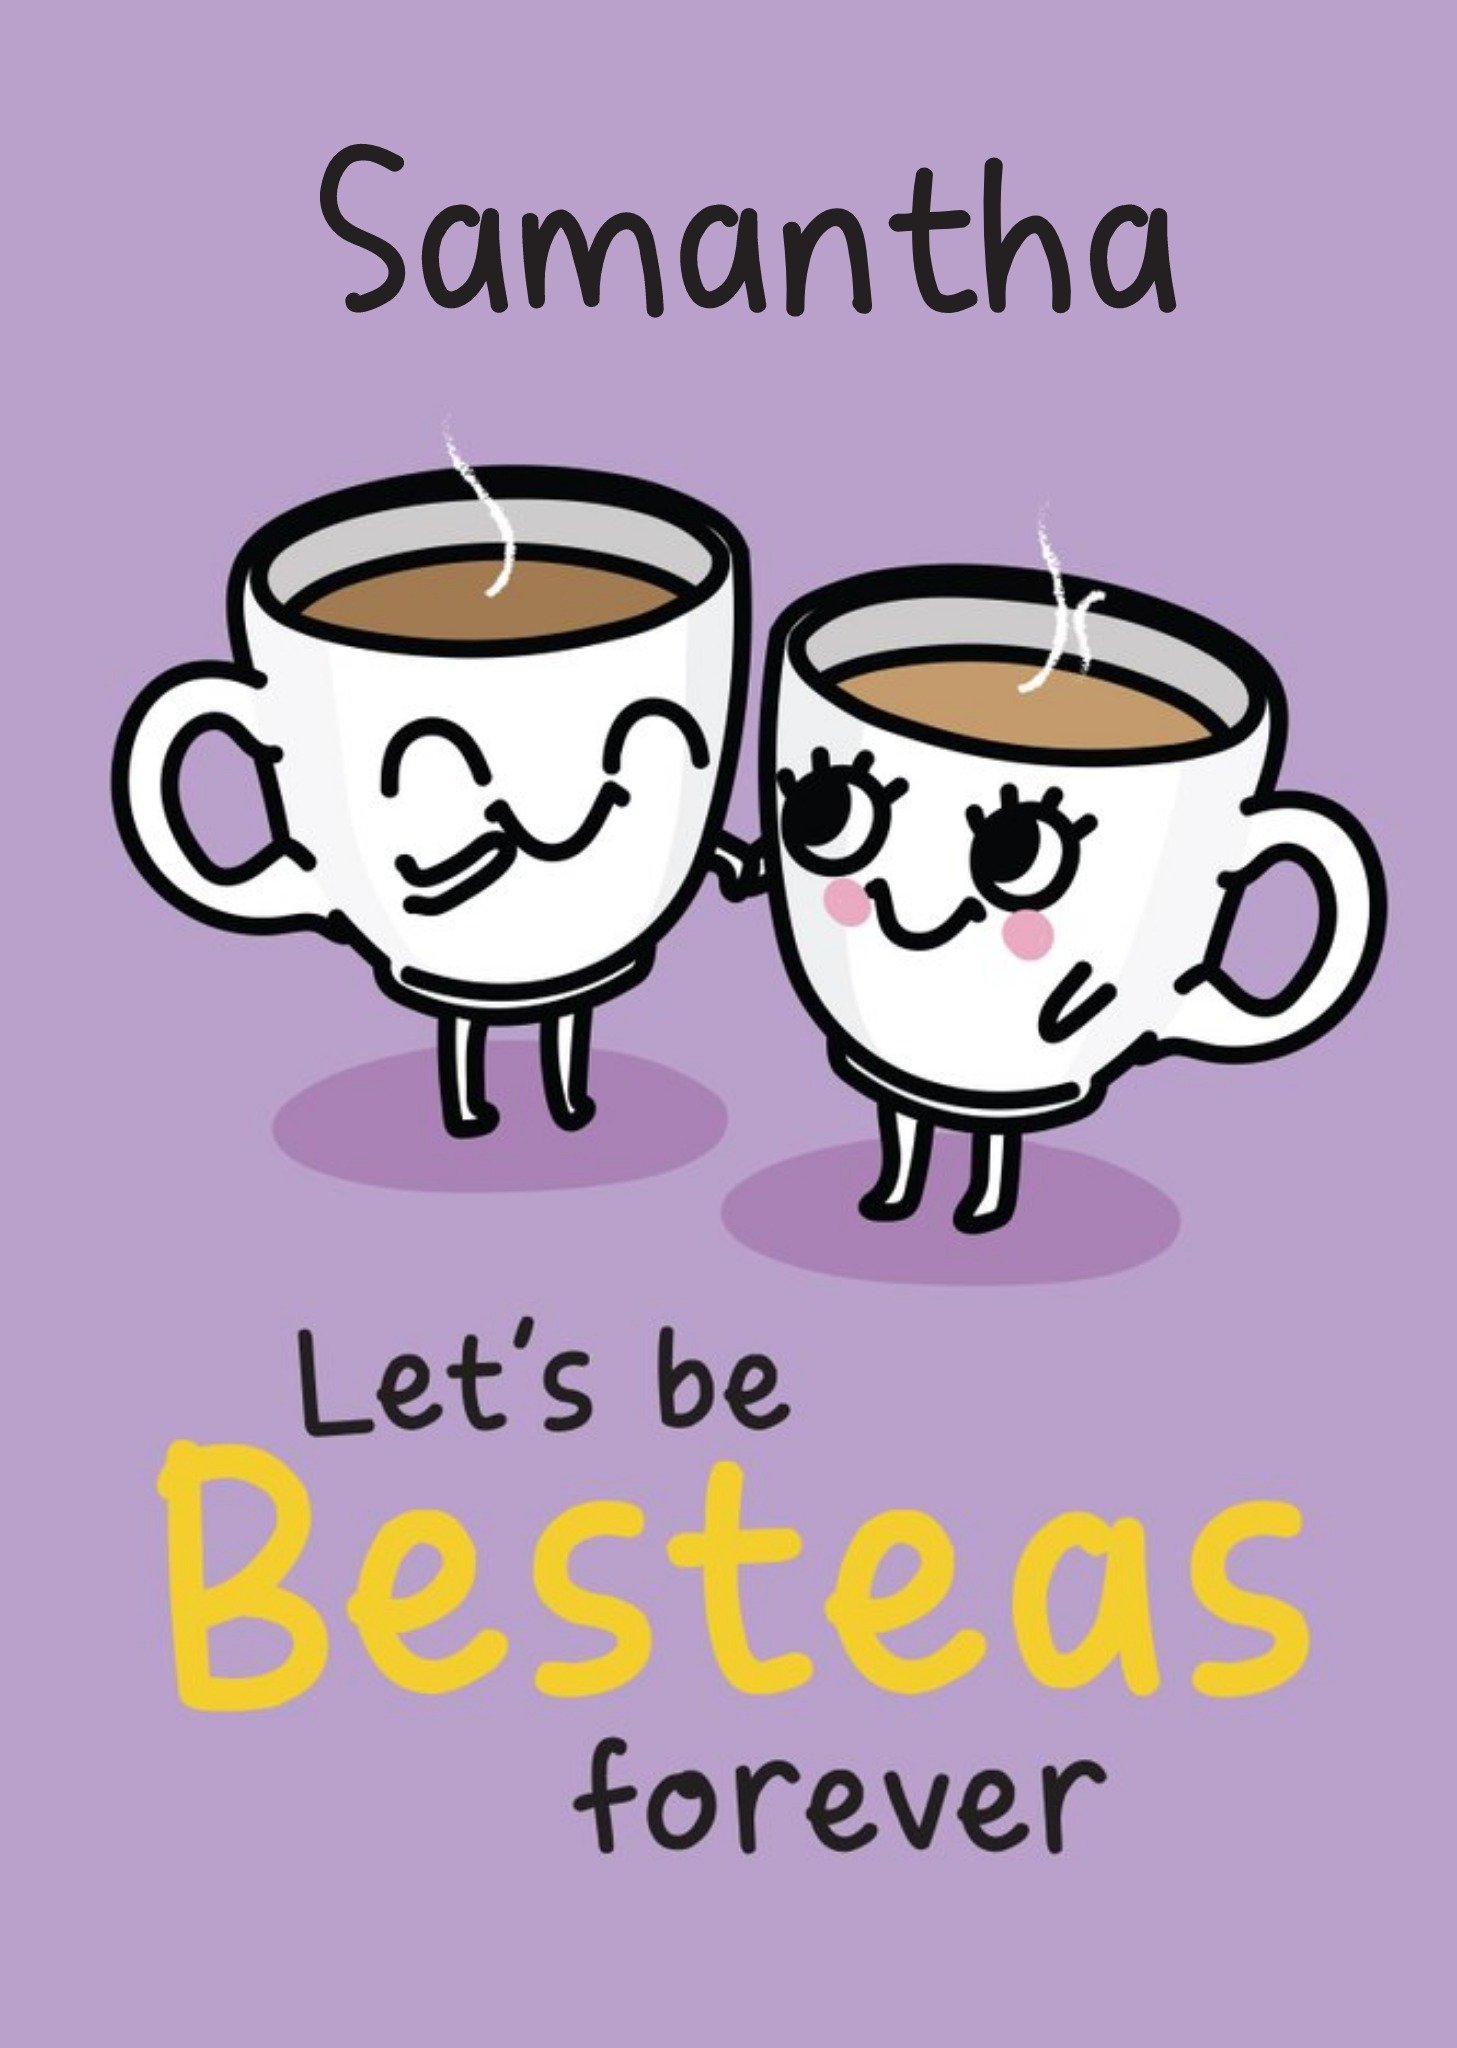 Moonpig Illustration Of Two Cups Of Tea. Let's Be Besteas Forever Birthday Card, Large